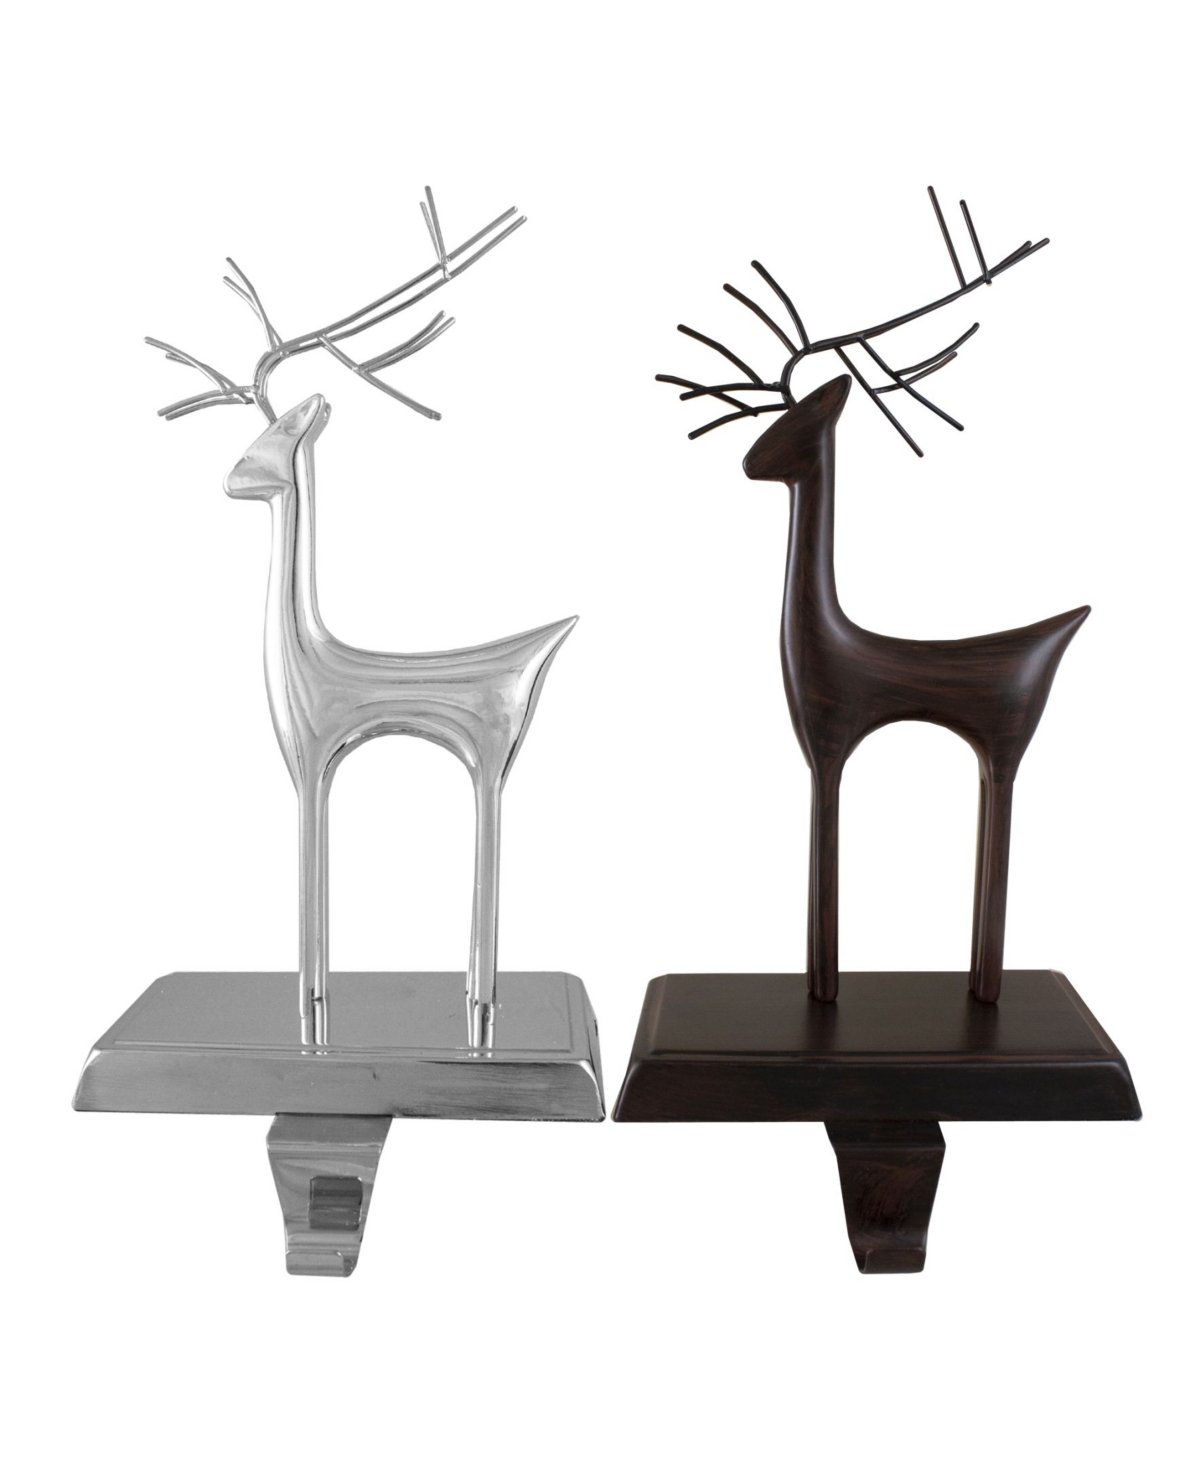 Oil Rubbed Reindeer Christmas Stocking Holders, Set of 2 - Bronze